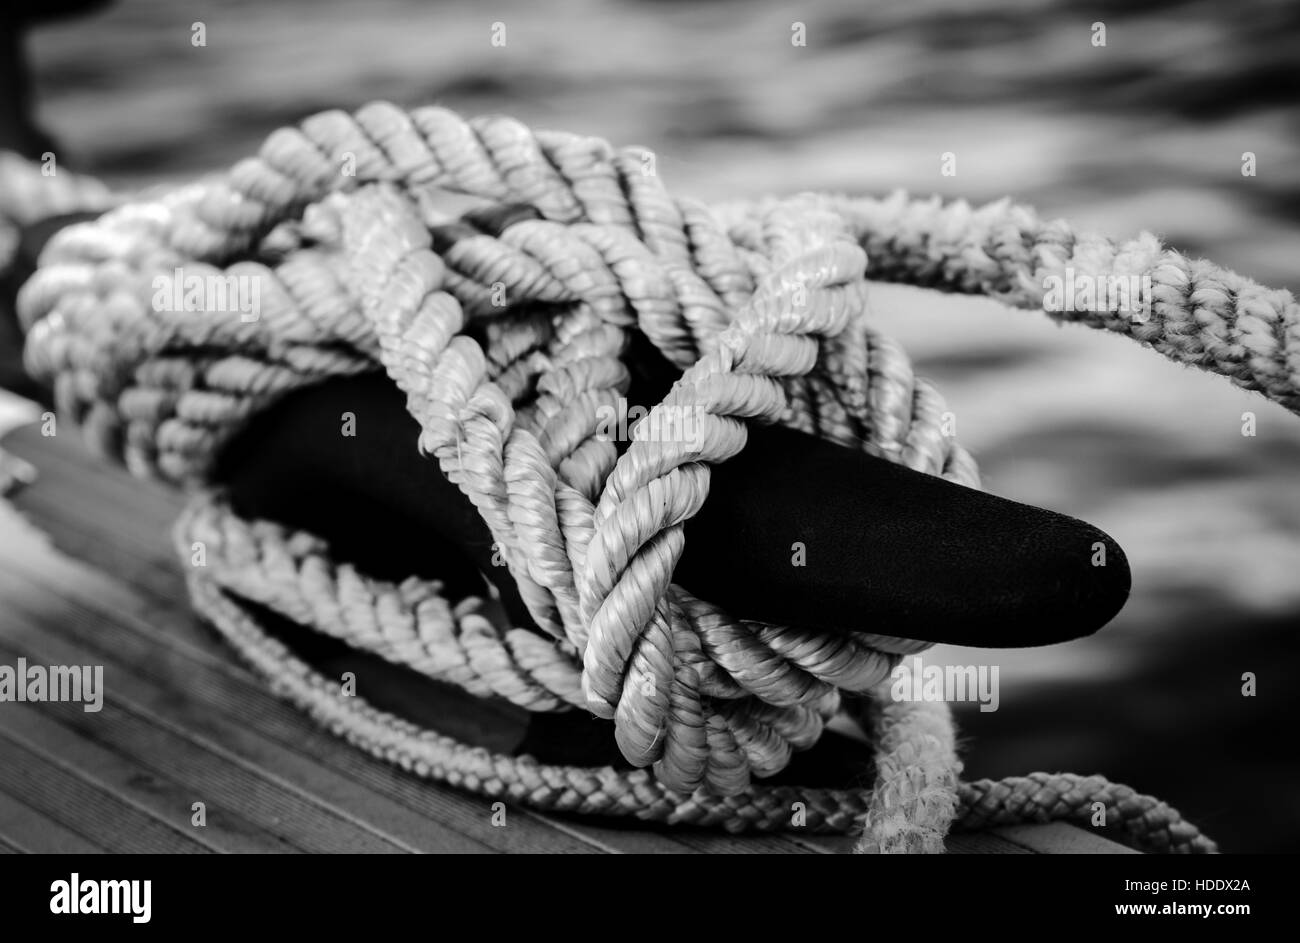 Rope tied around a cleat on a dock Stock Photo